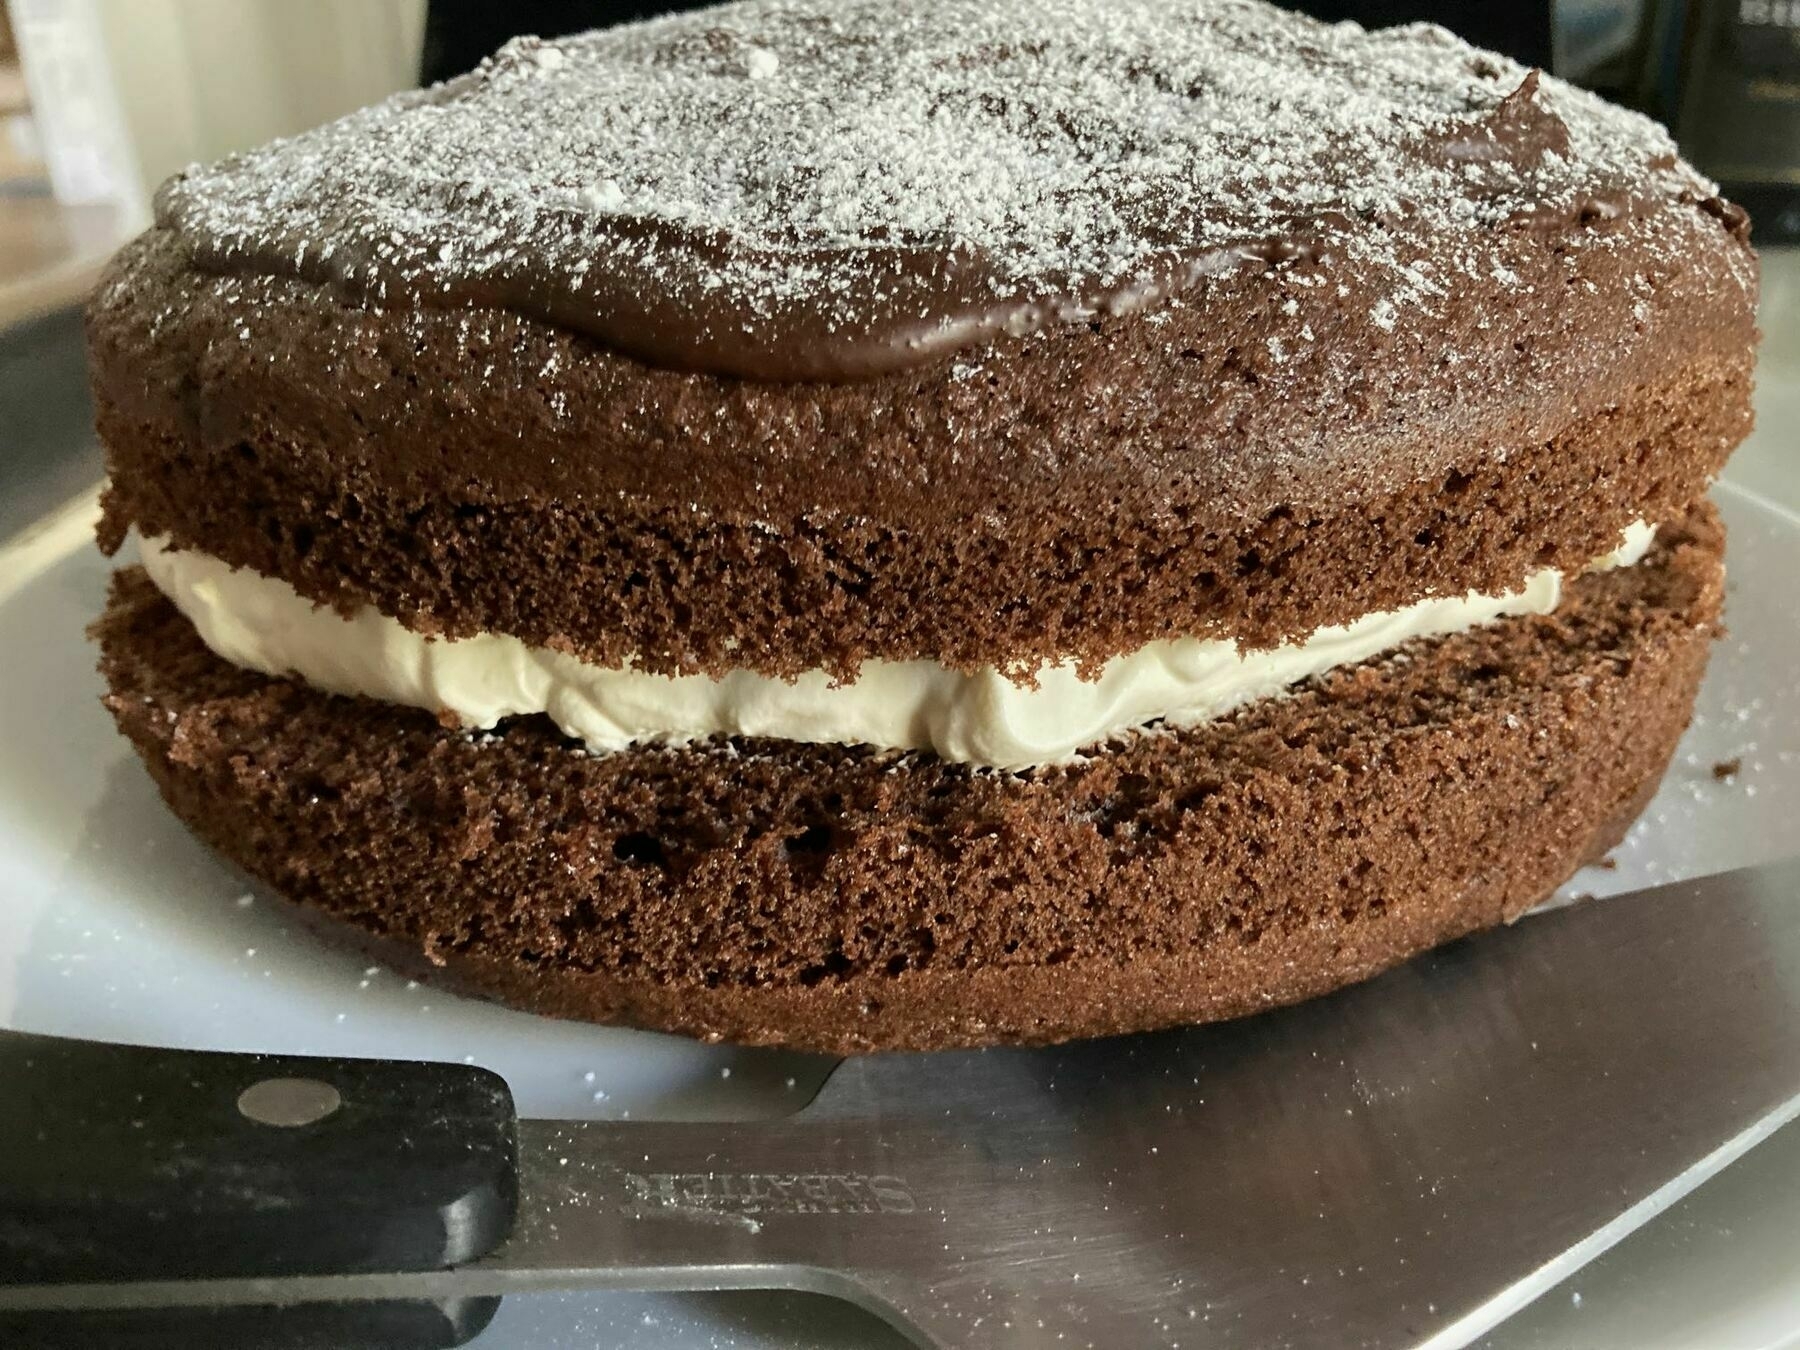 A chocolate cake with cream filling in the middle